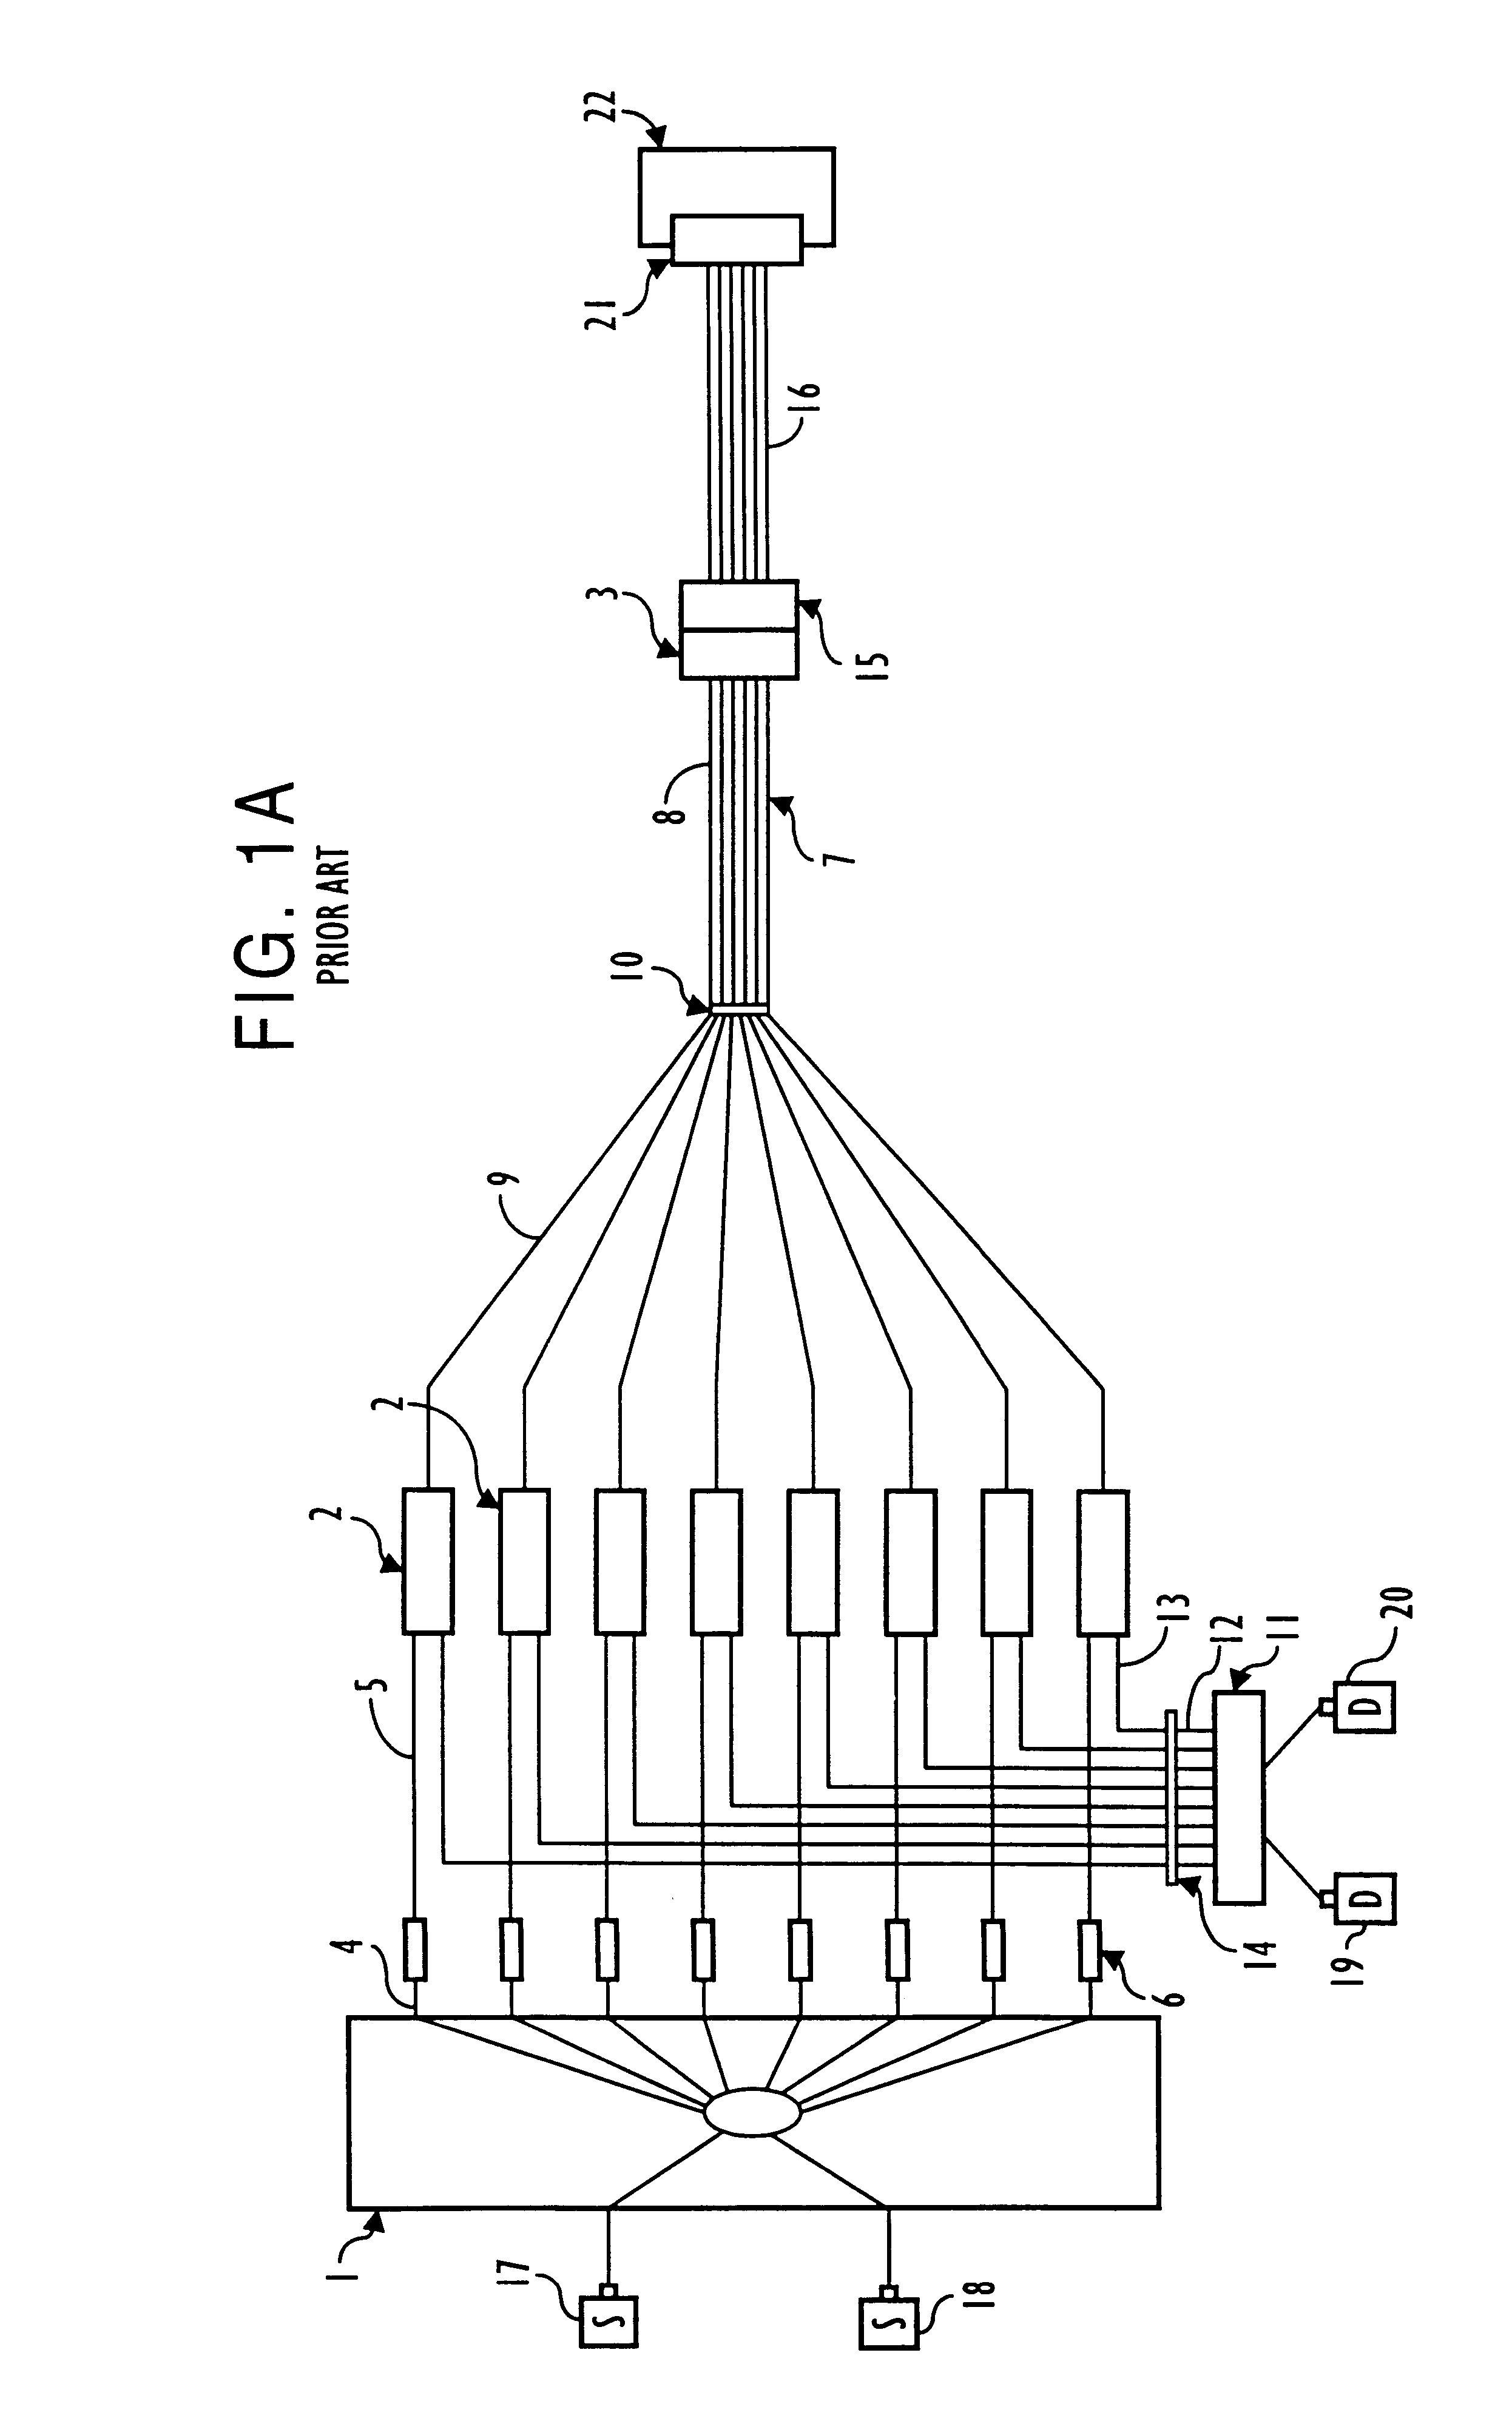 Apparatus and method for testing optical fiber system components